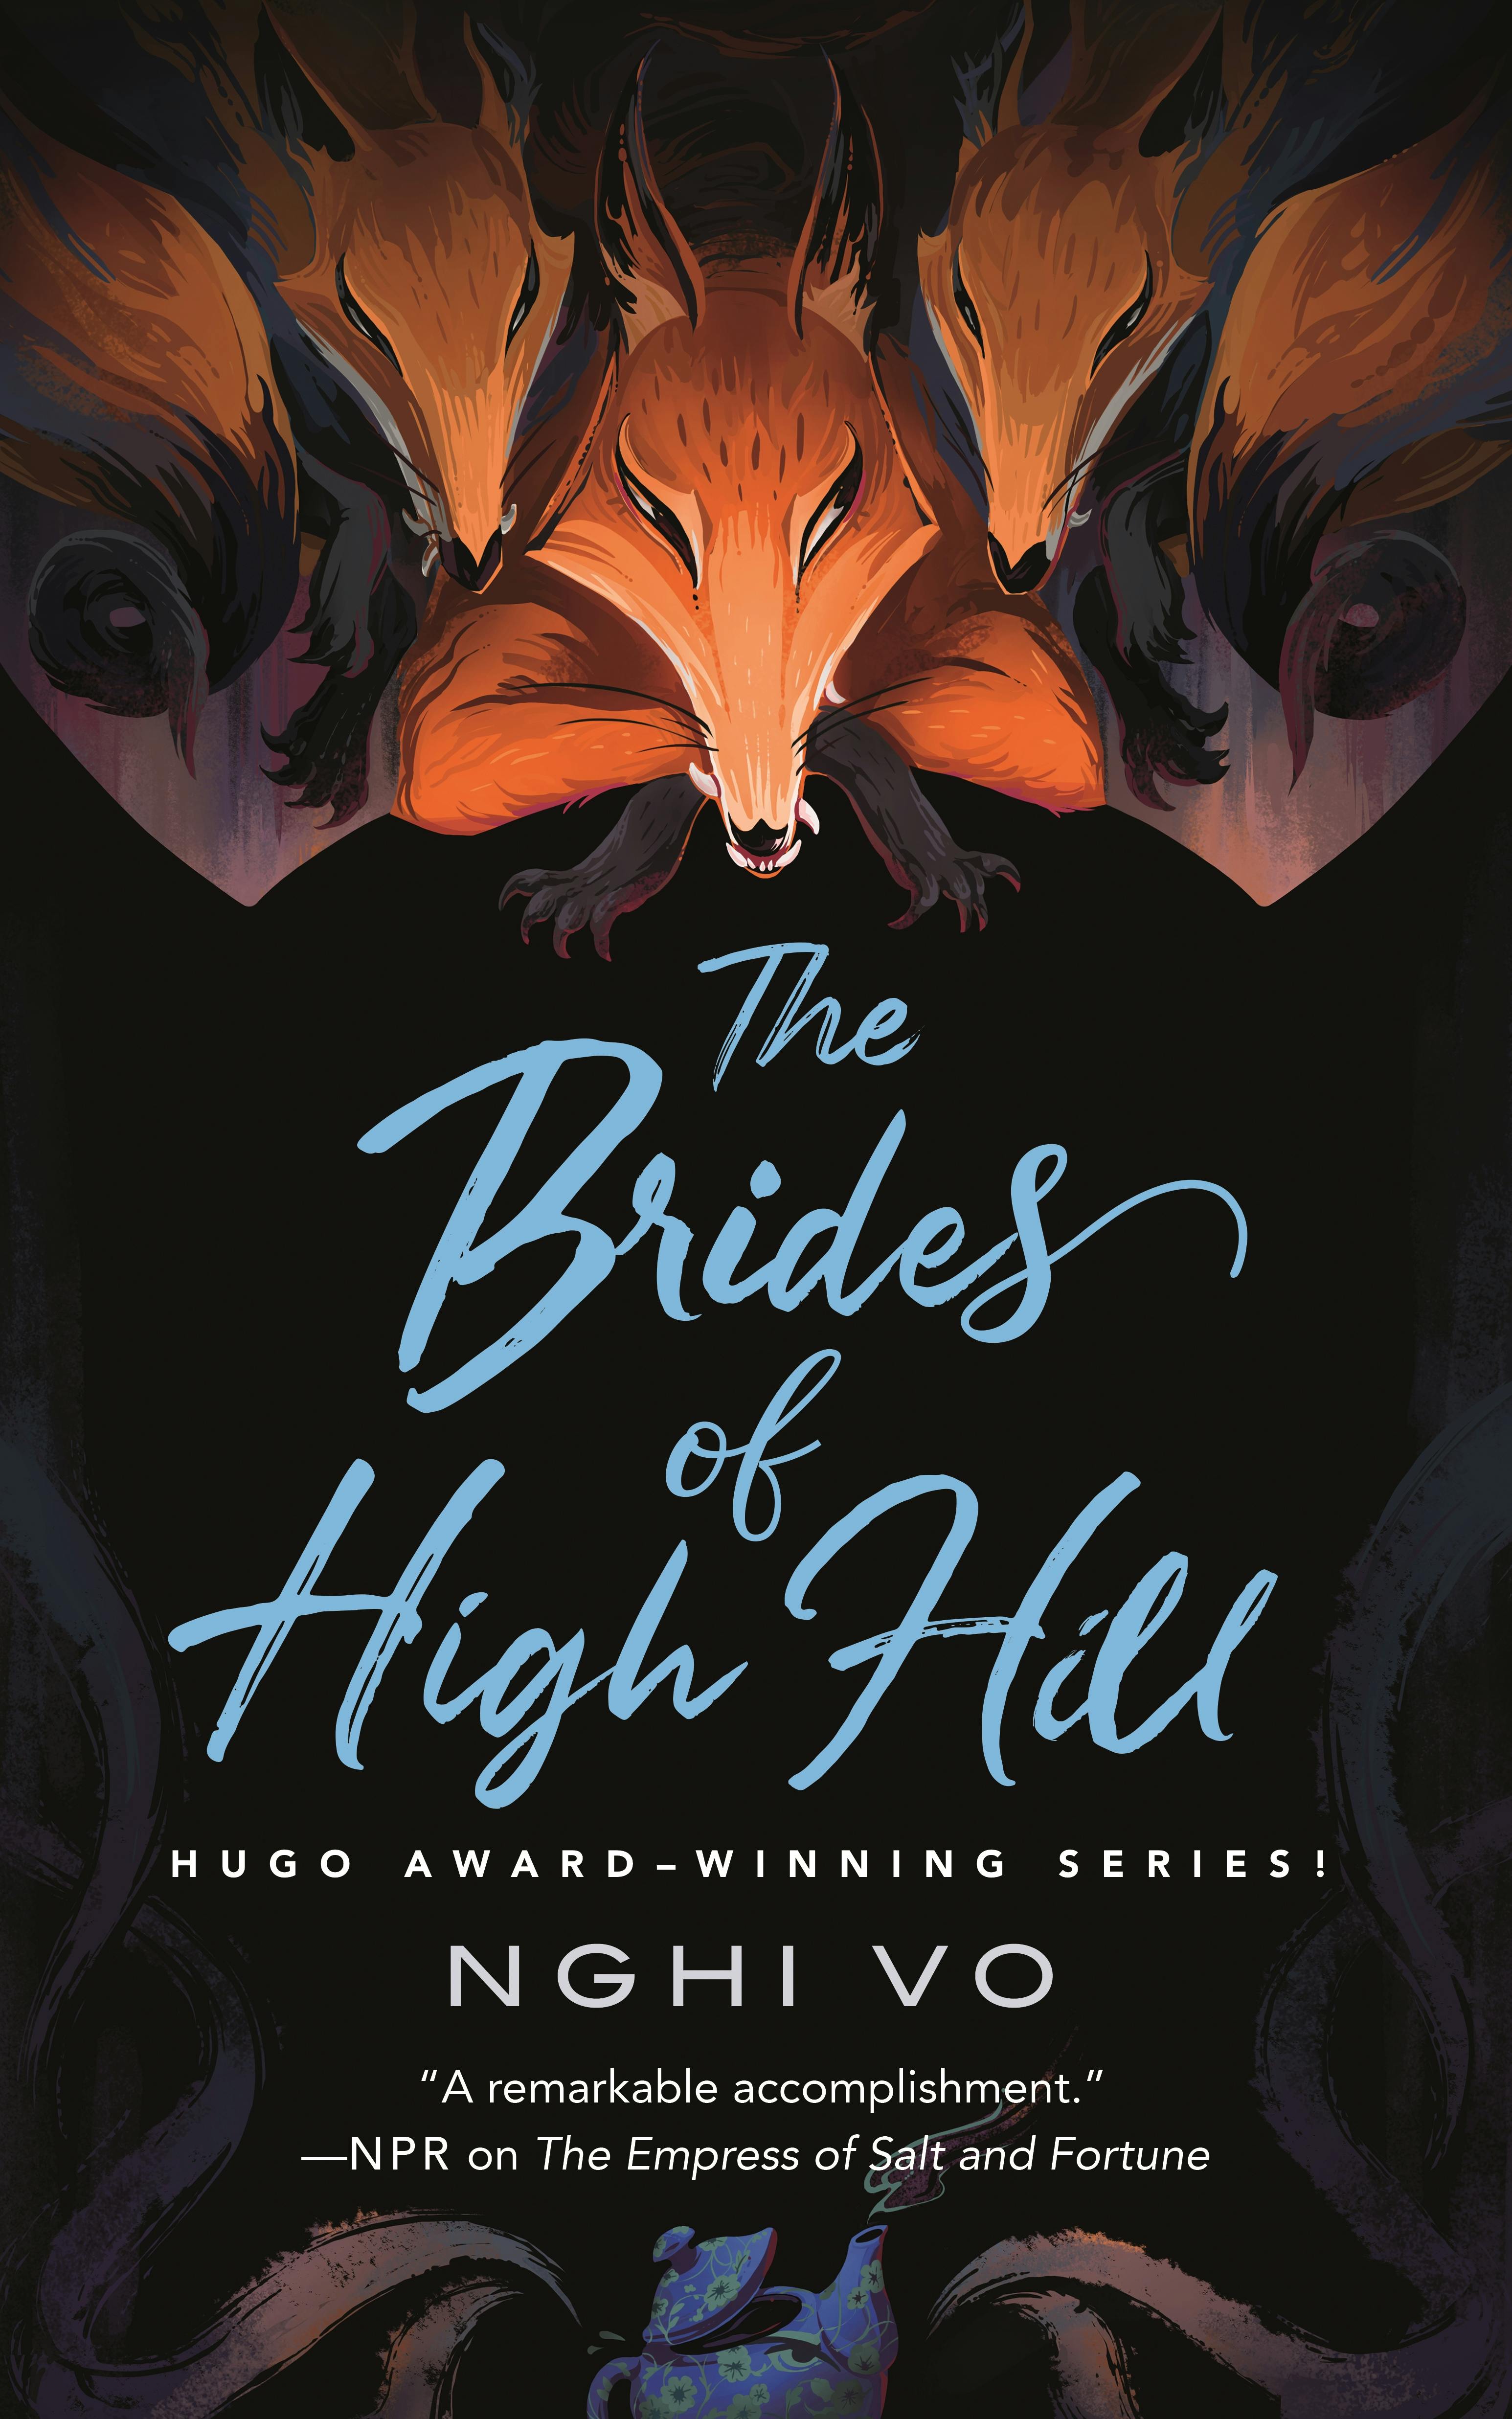 Cover for the book titled as: The Brides of High Hill